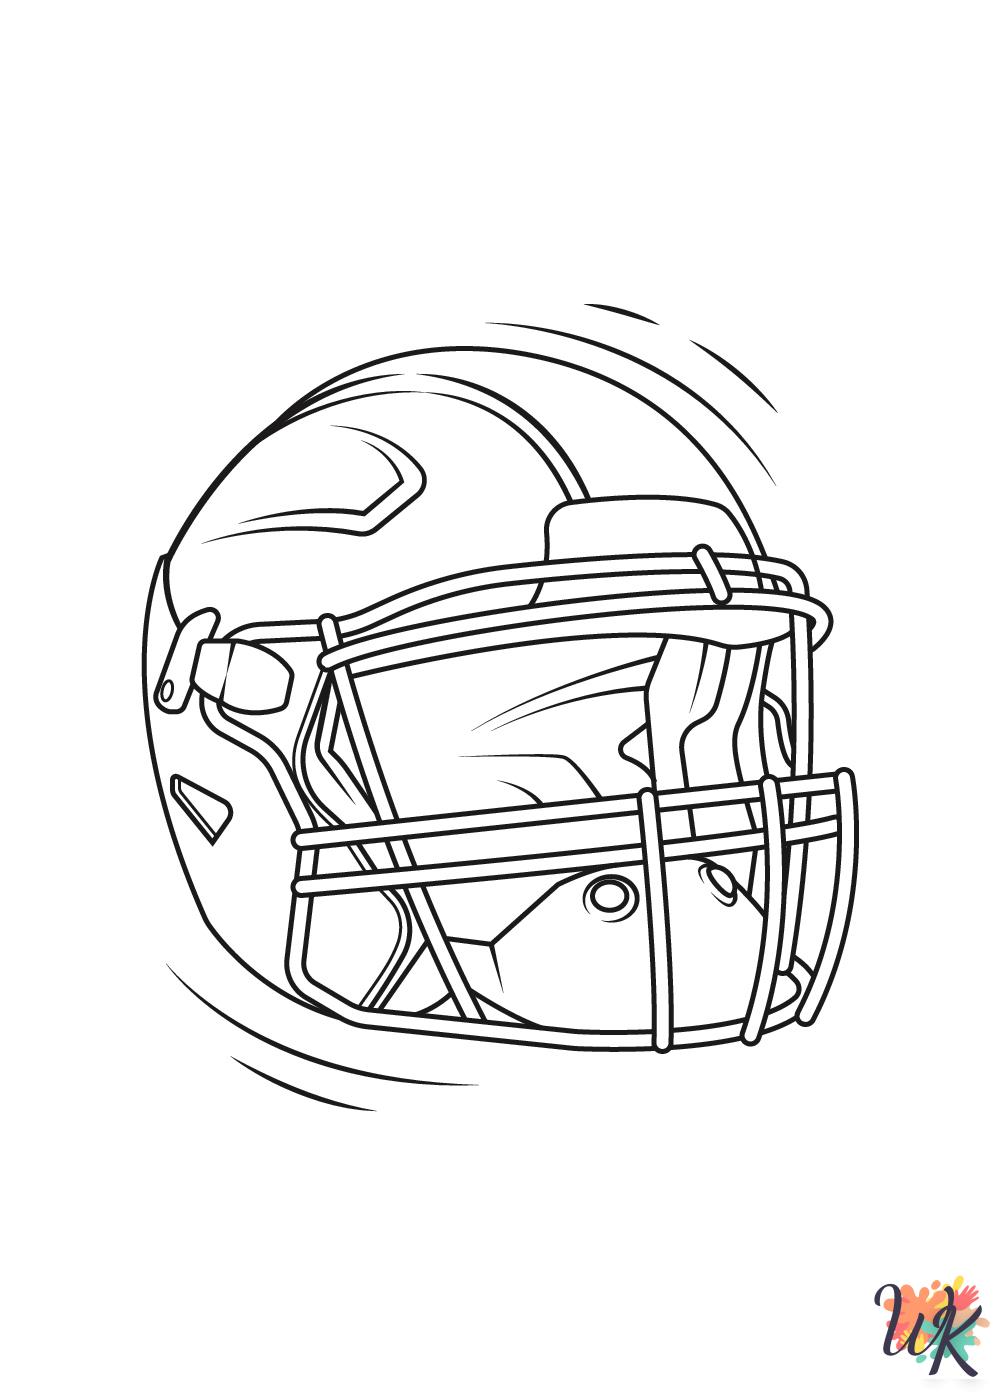 coloring pages for NFL